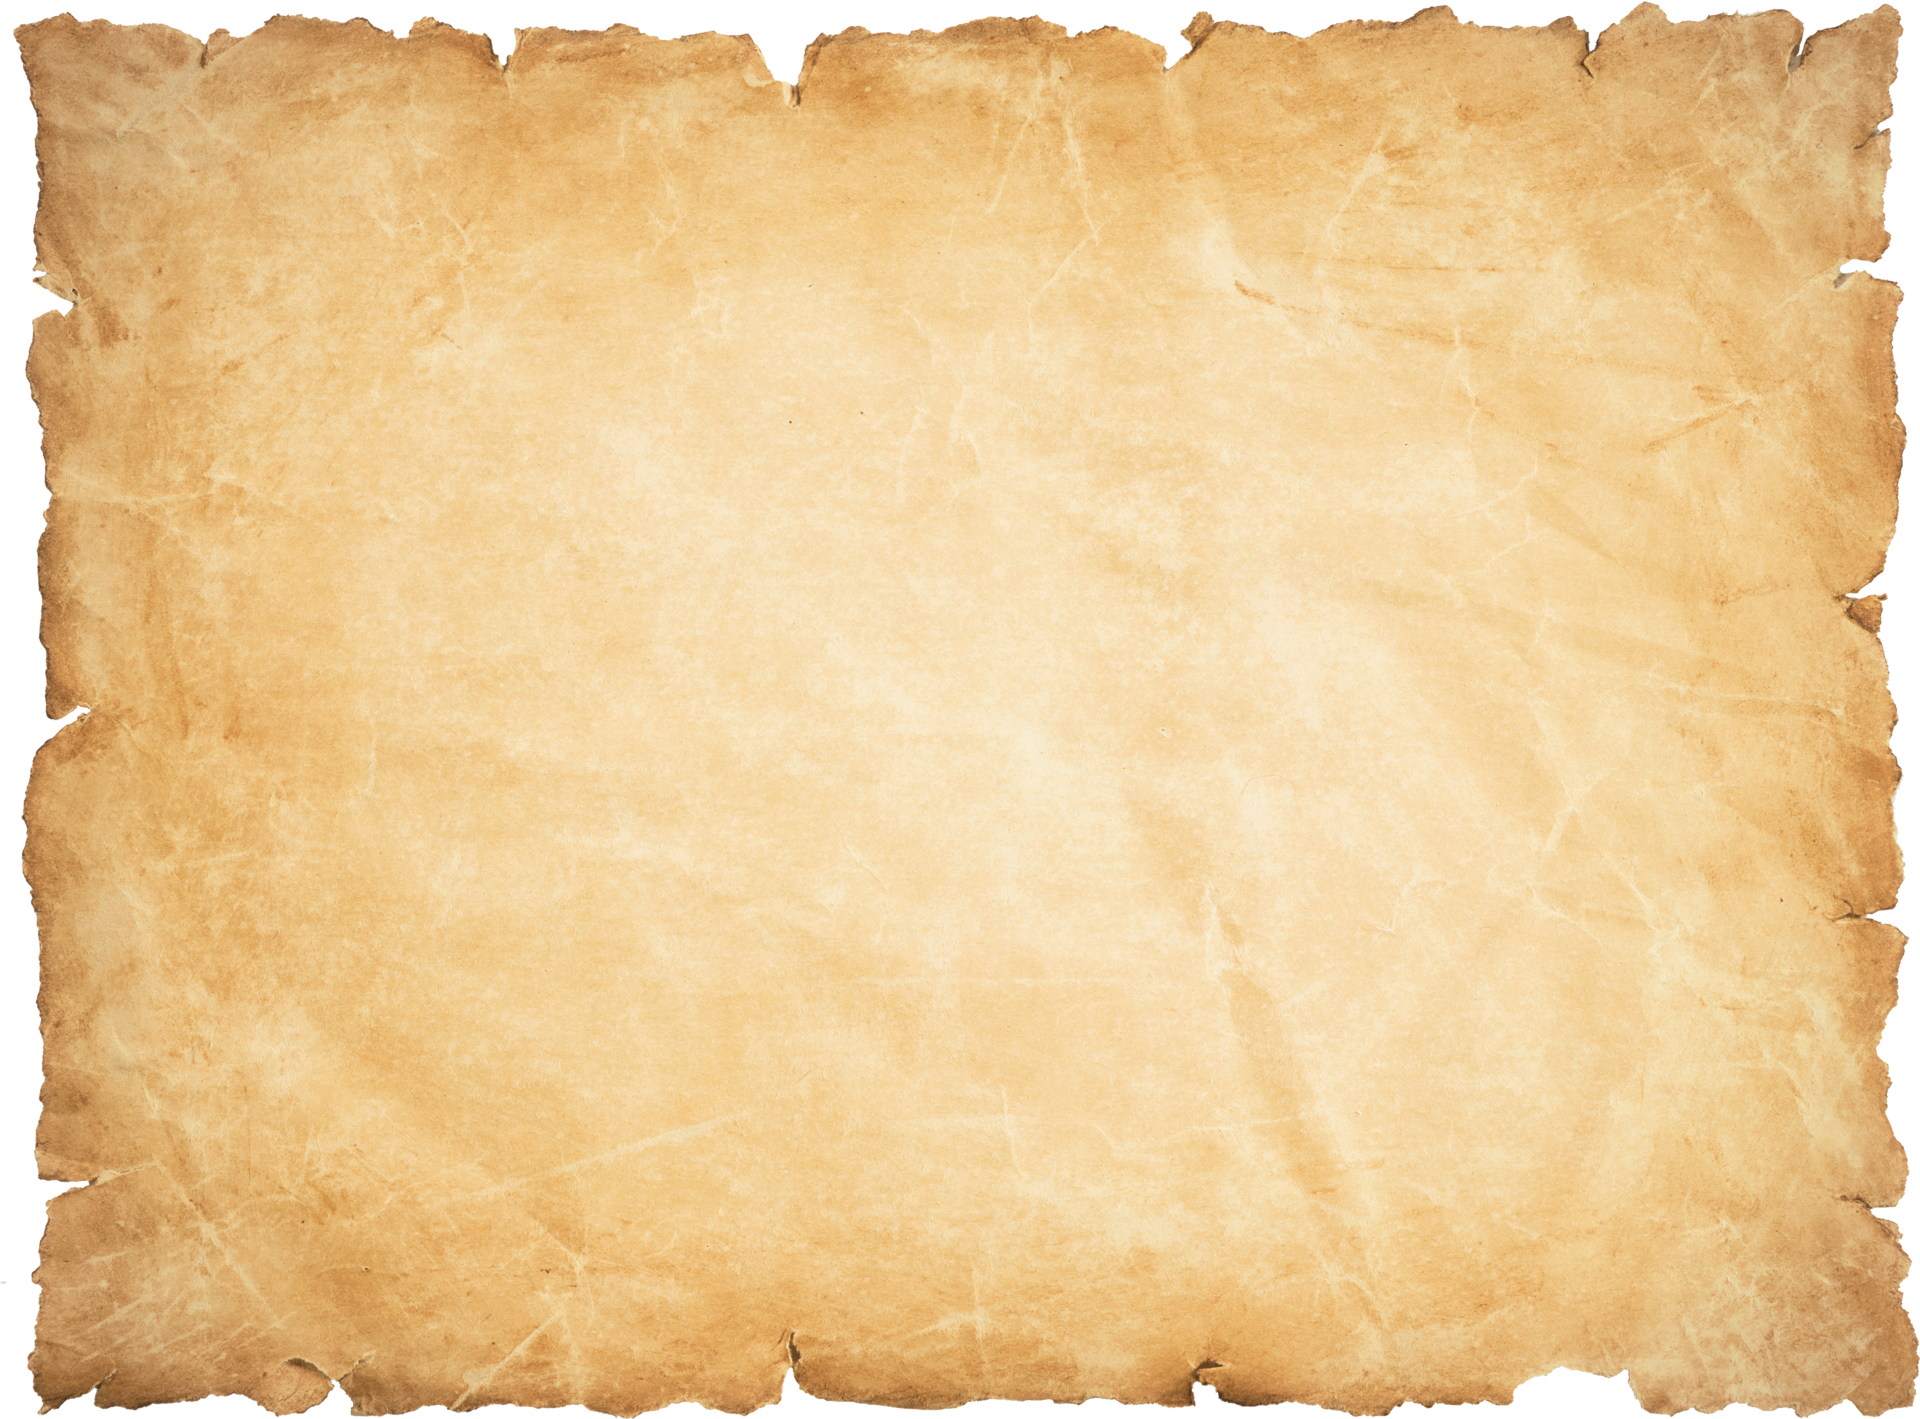 https://static.vecteezy.com/system/resources/previews/012/981/791/original/old-parchment-paper-sheet-vintage-aged-or-texture-background-png.png